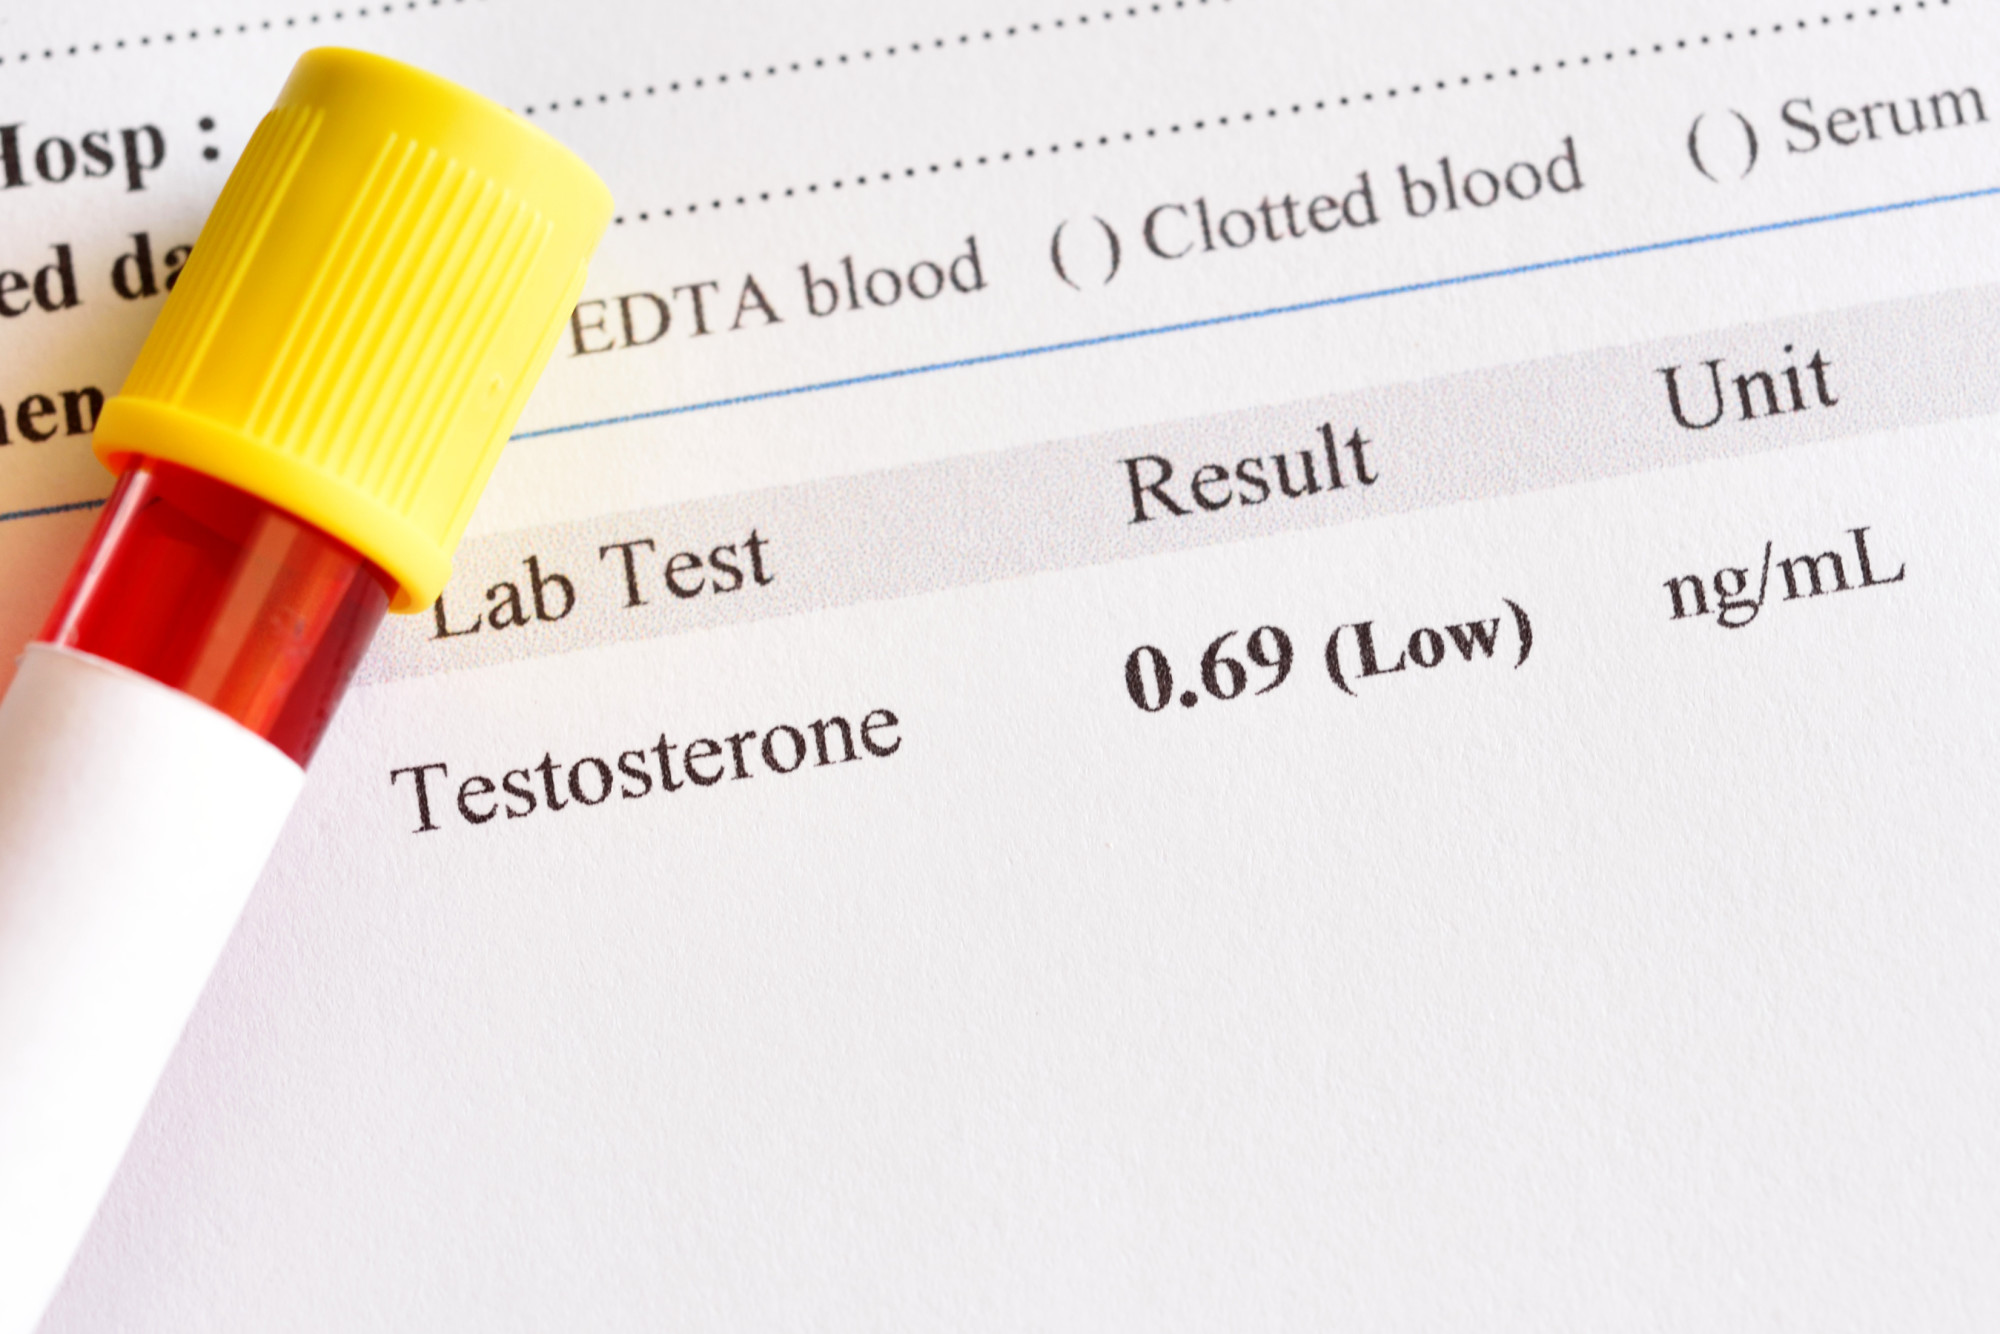 Finding the right low testosterone treatments can help you bounce back to your normal self, and get your hormone health back on track.